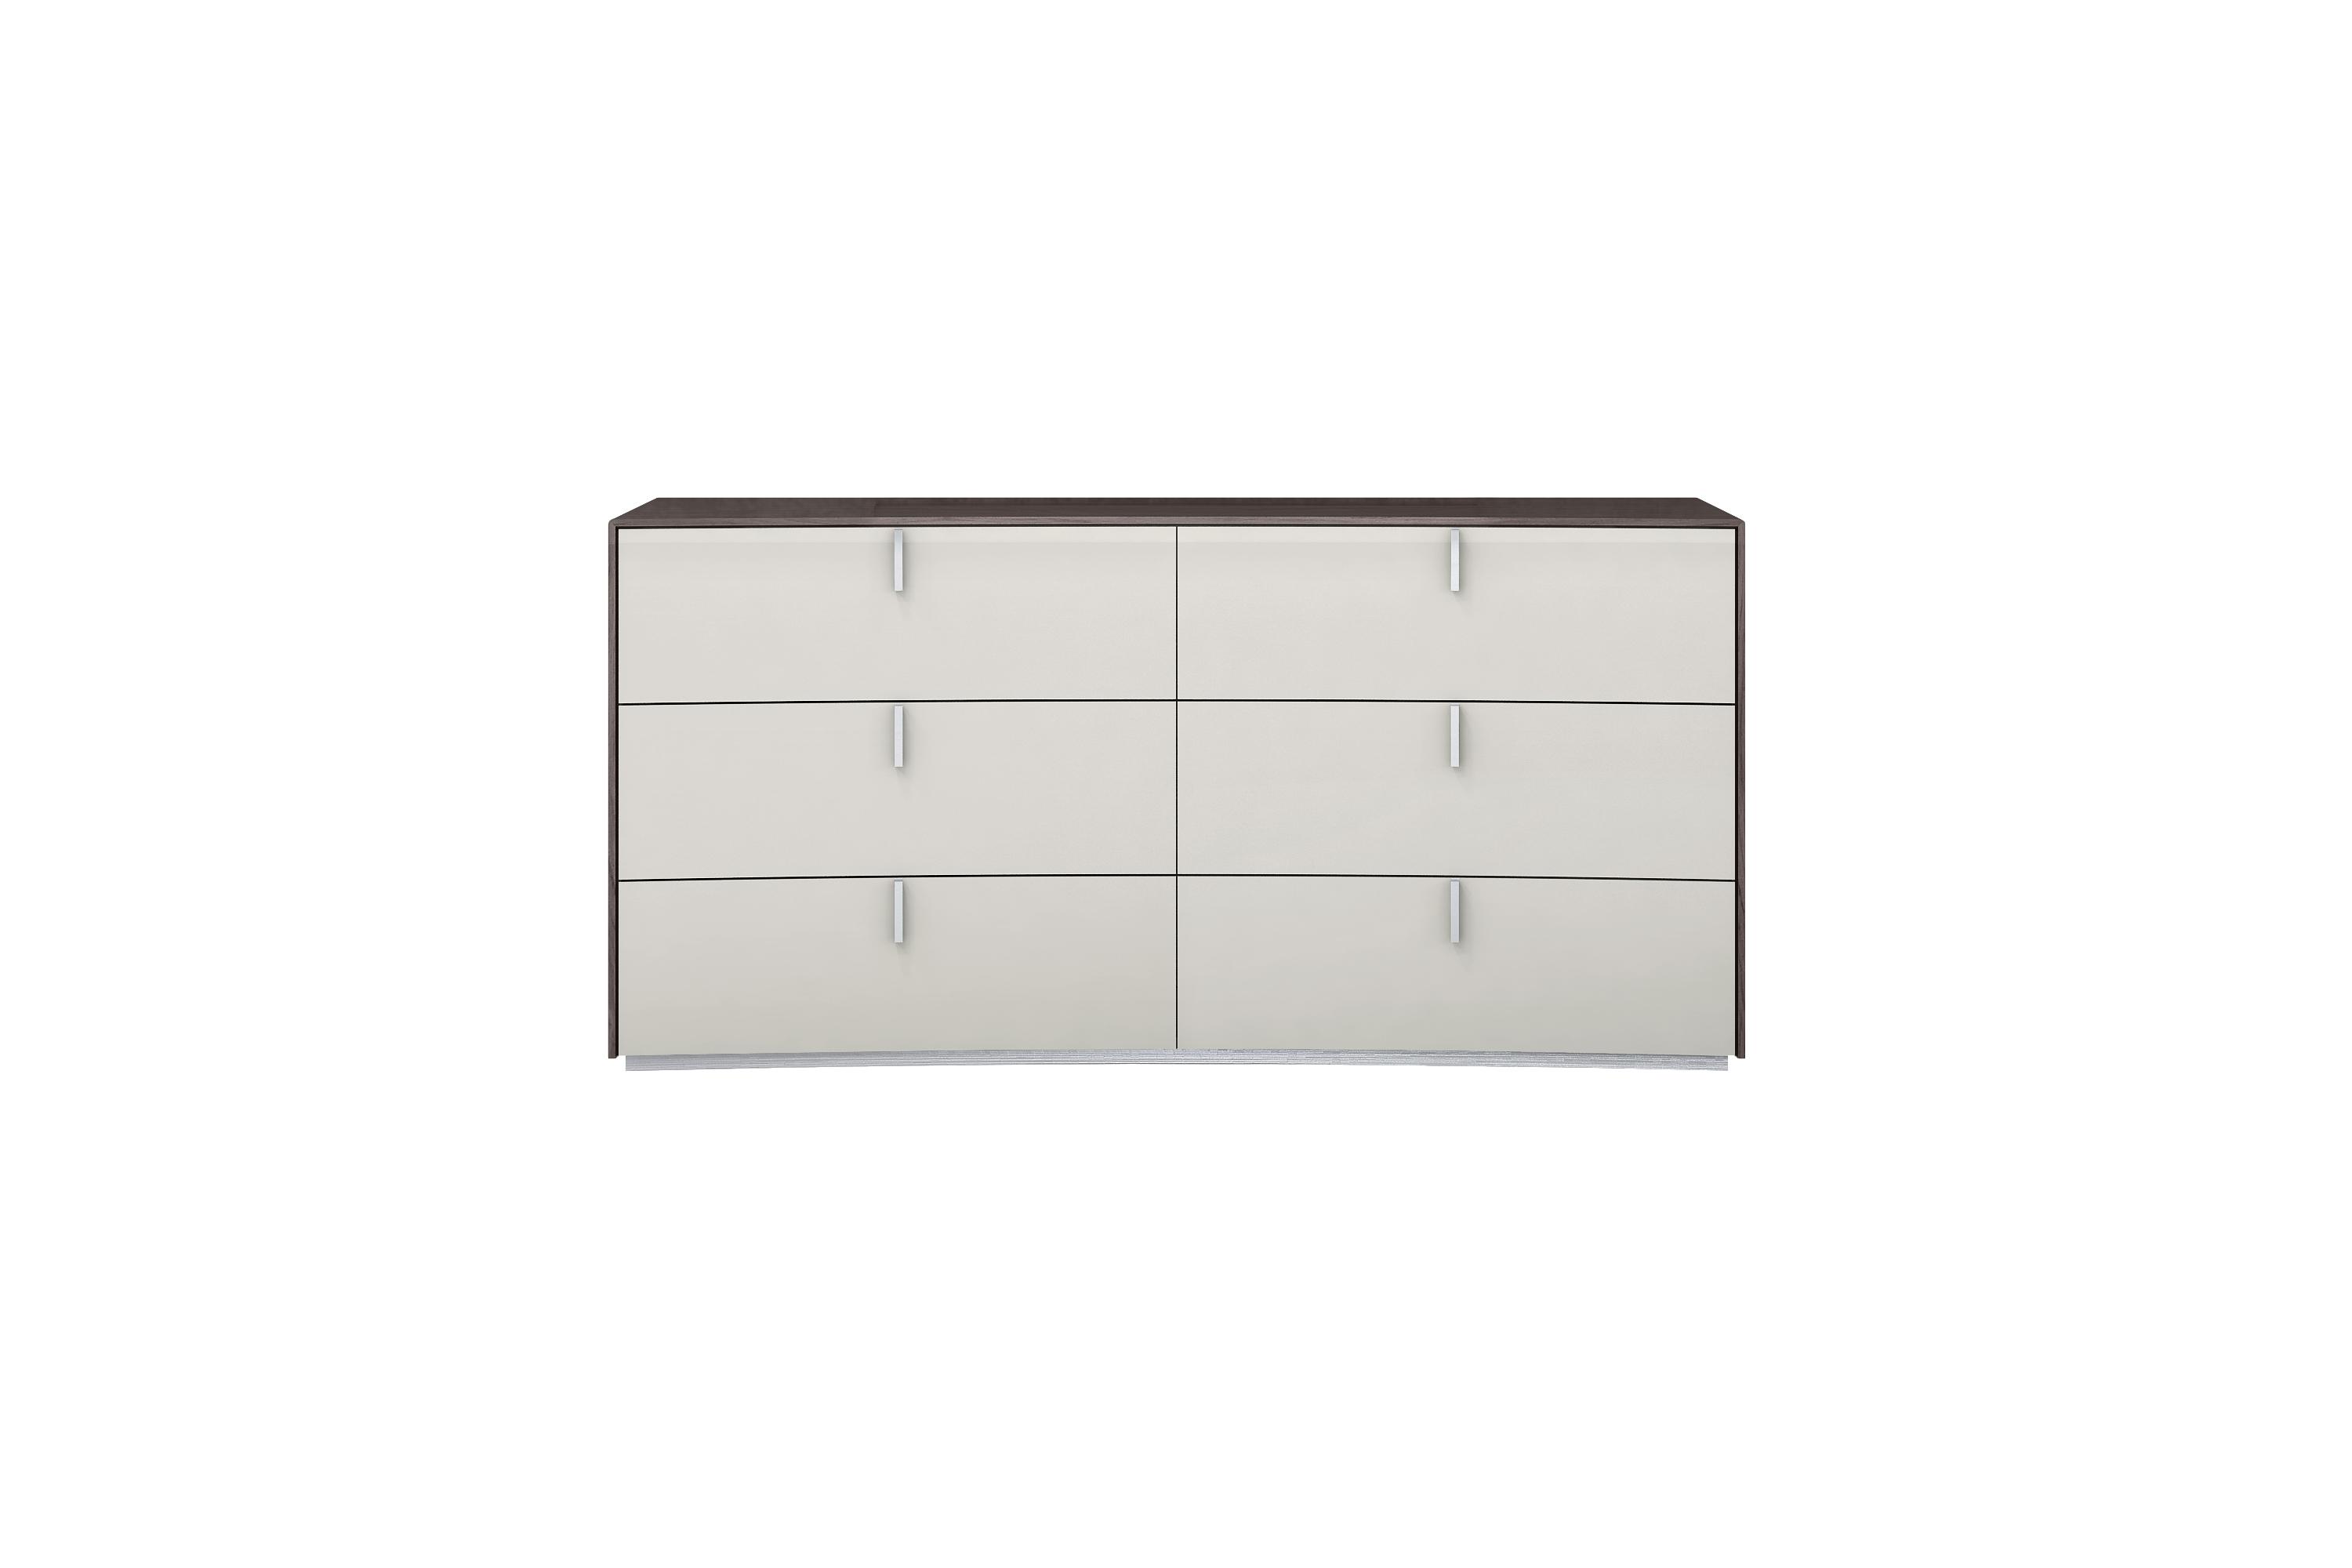 Contemporary Dresser DR1754-GRY/LGRY Berlin DR1754-GRY/LGRY in Light Gray 